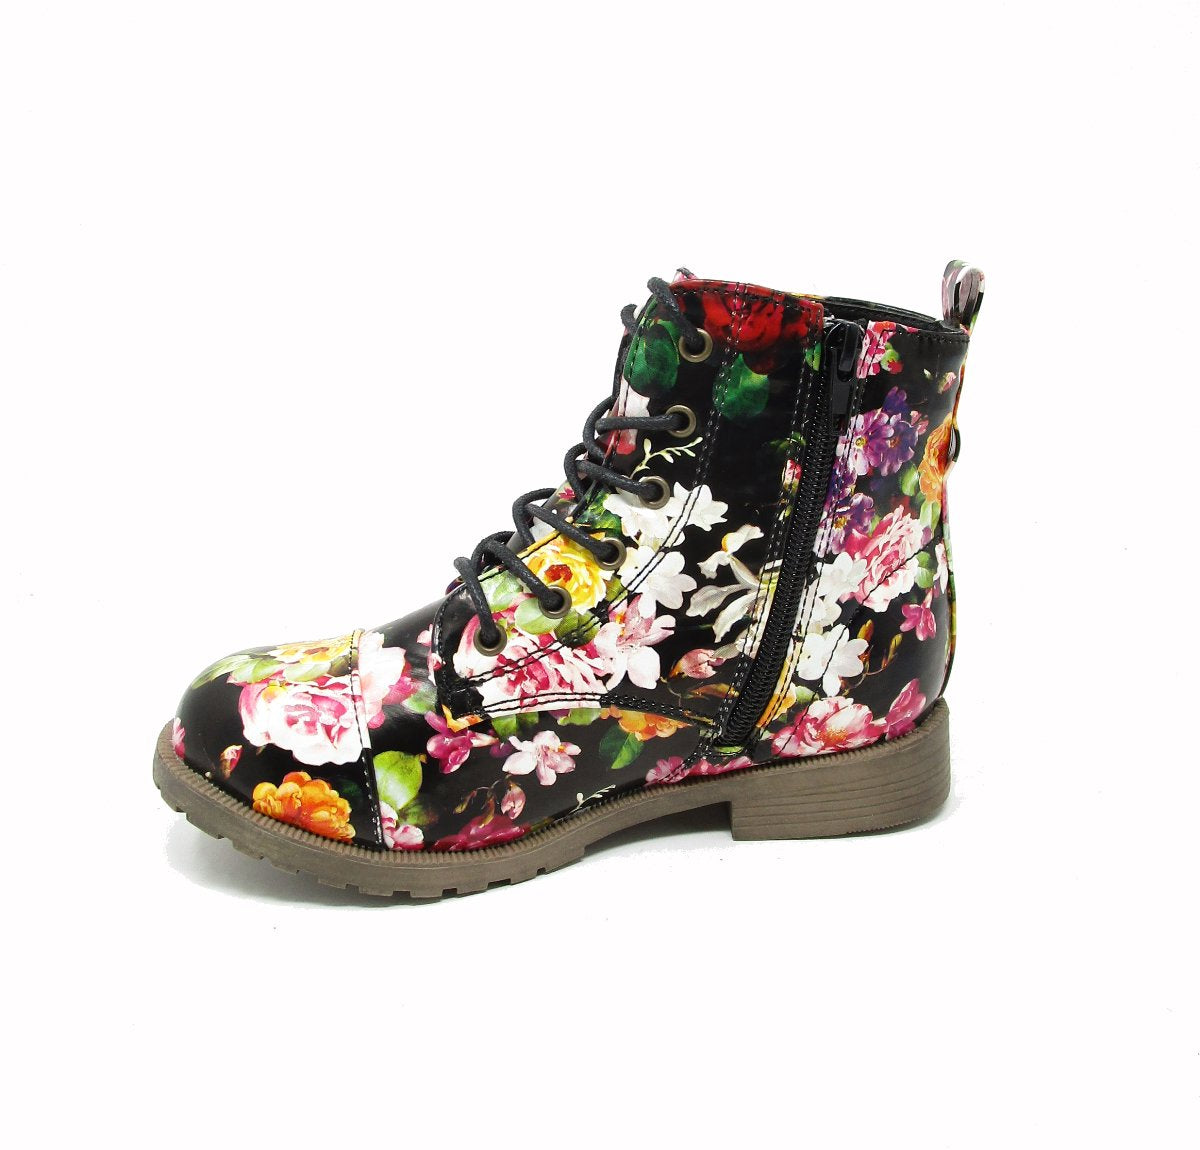 Girls Floral Flat Ankle Boots with dustbag + Hairbows